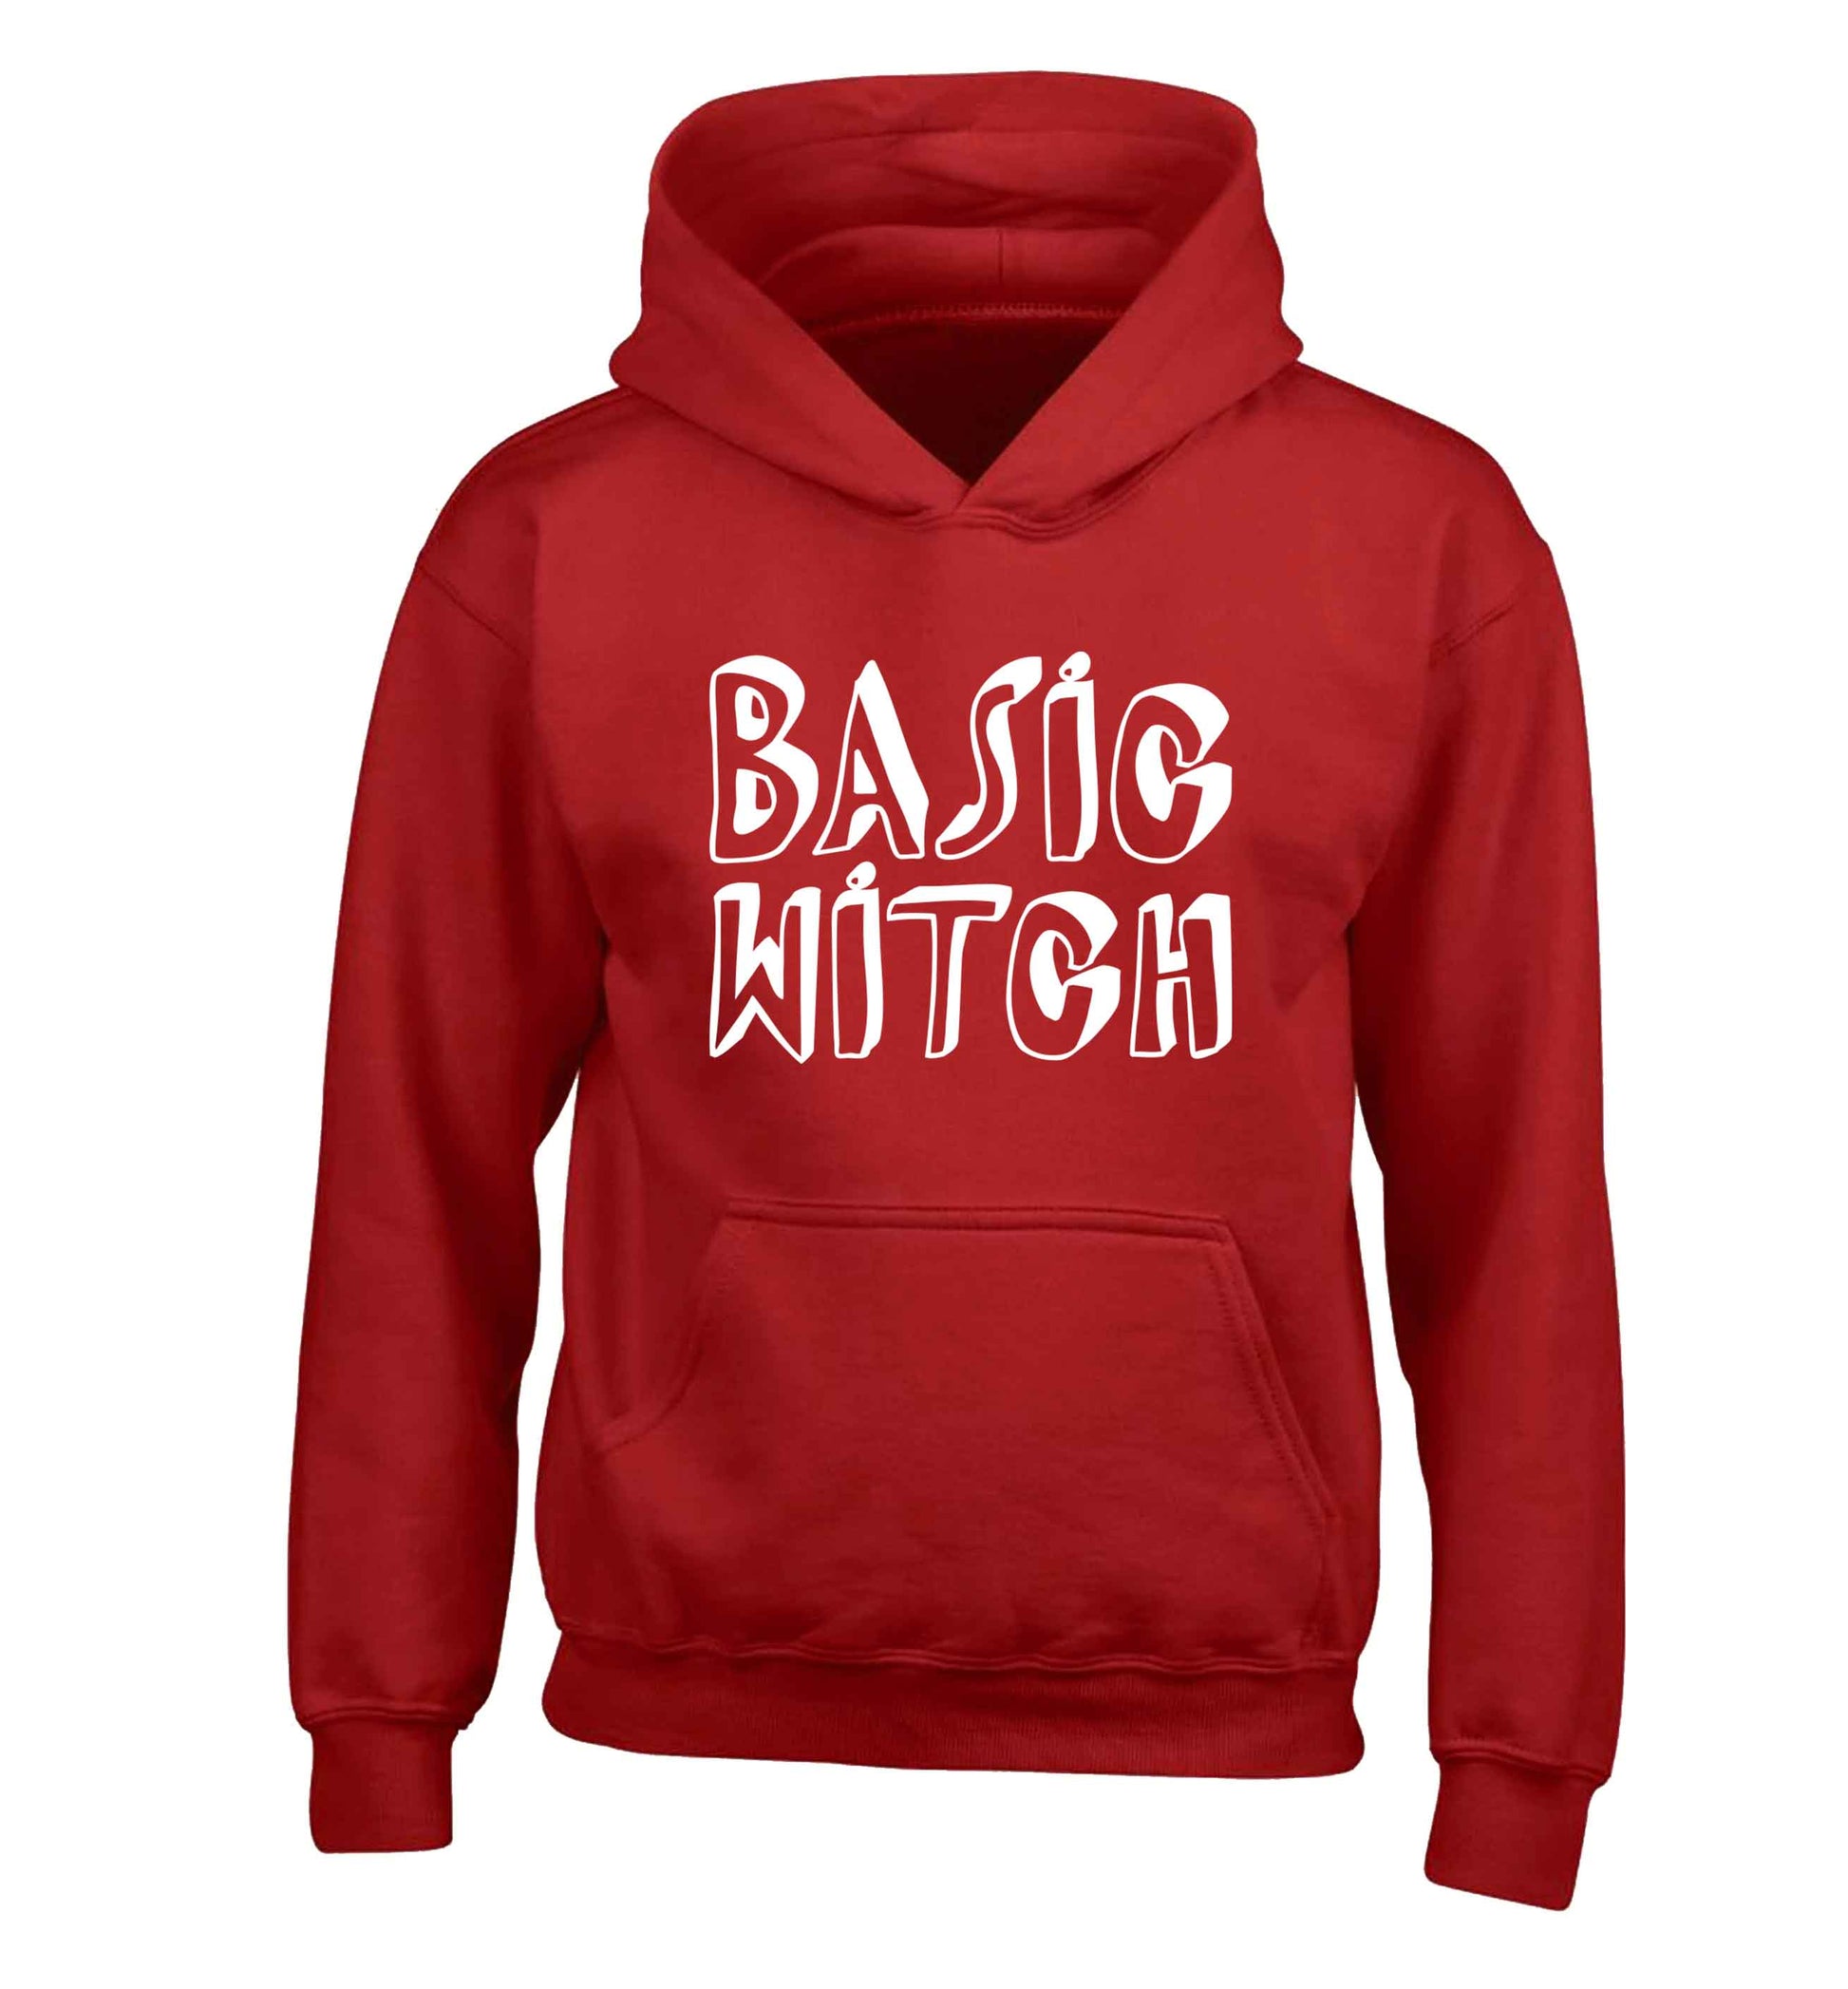 Basic witch children's red hoodie 12-13 Years